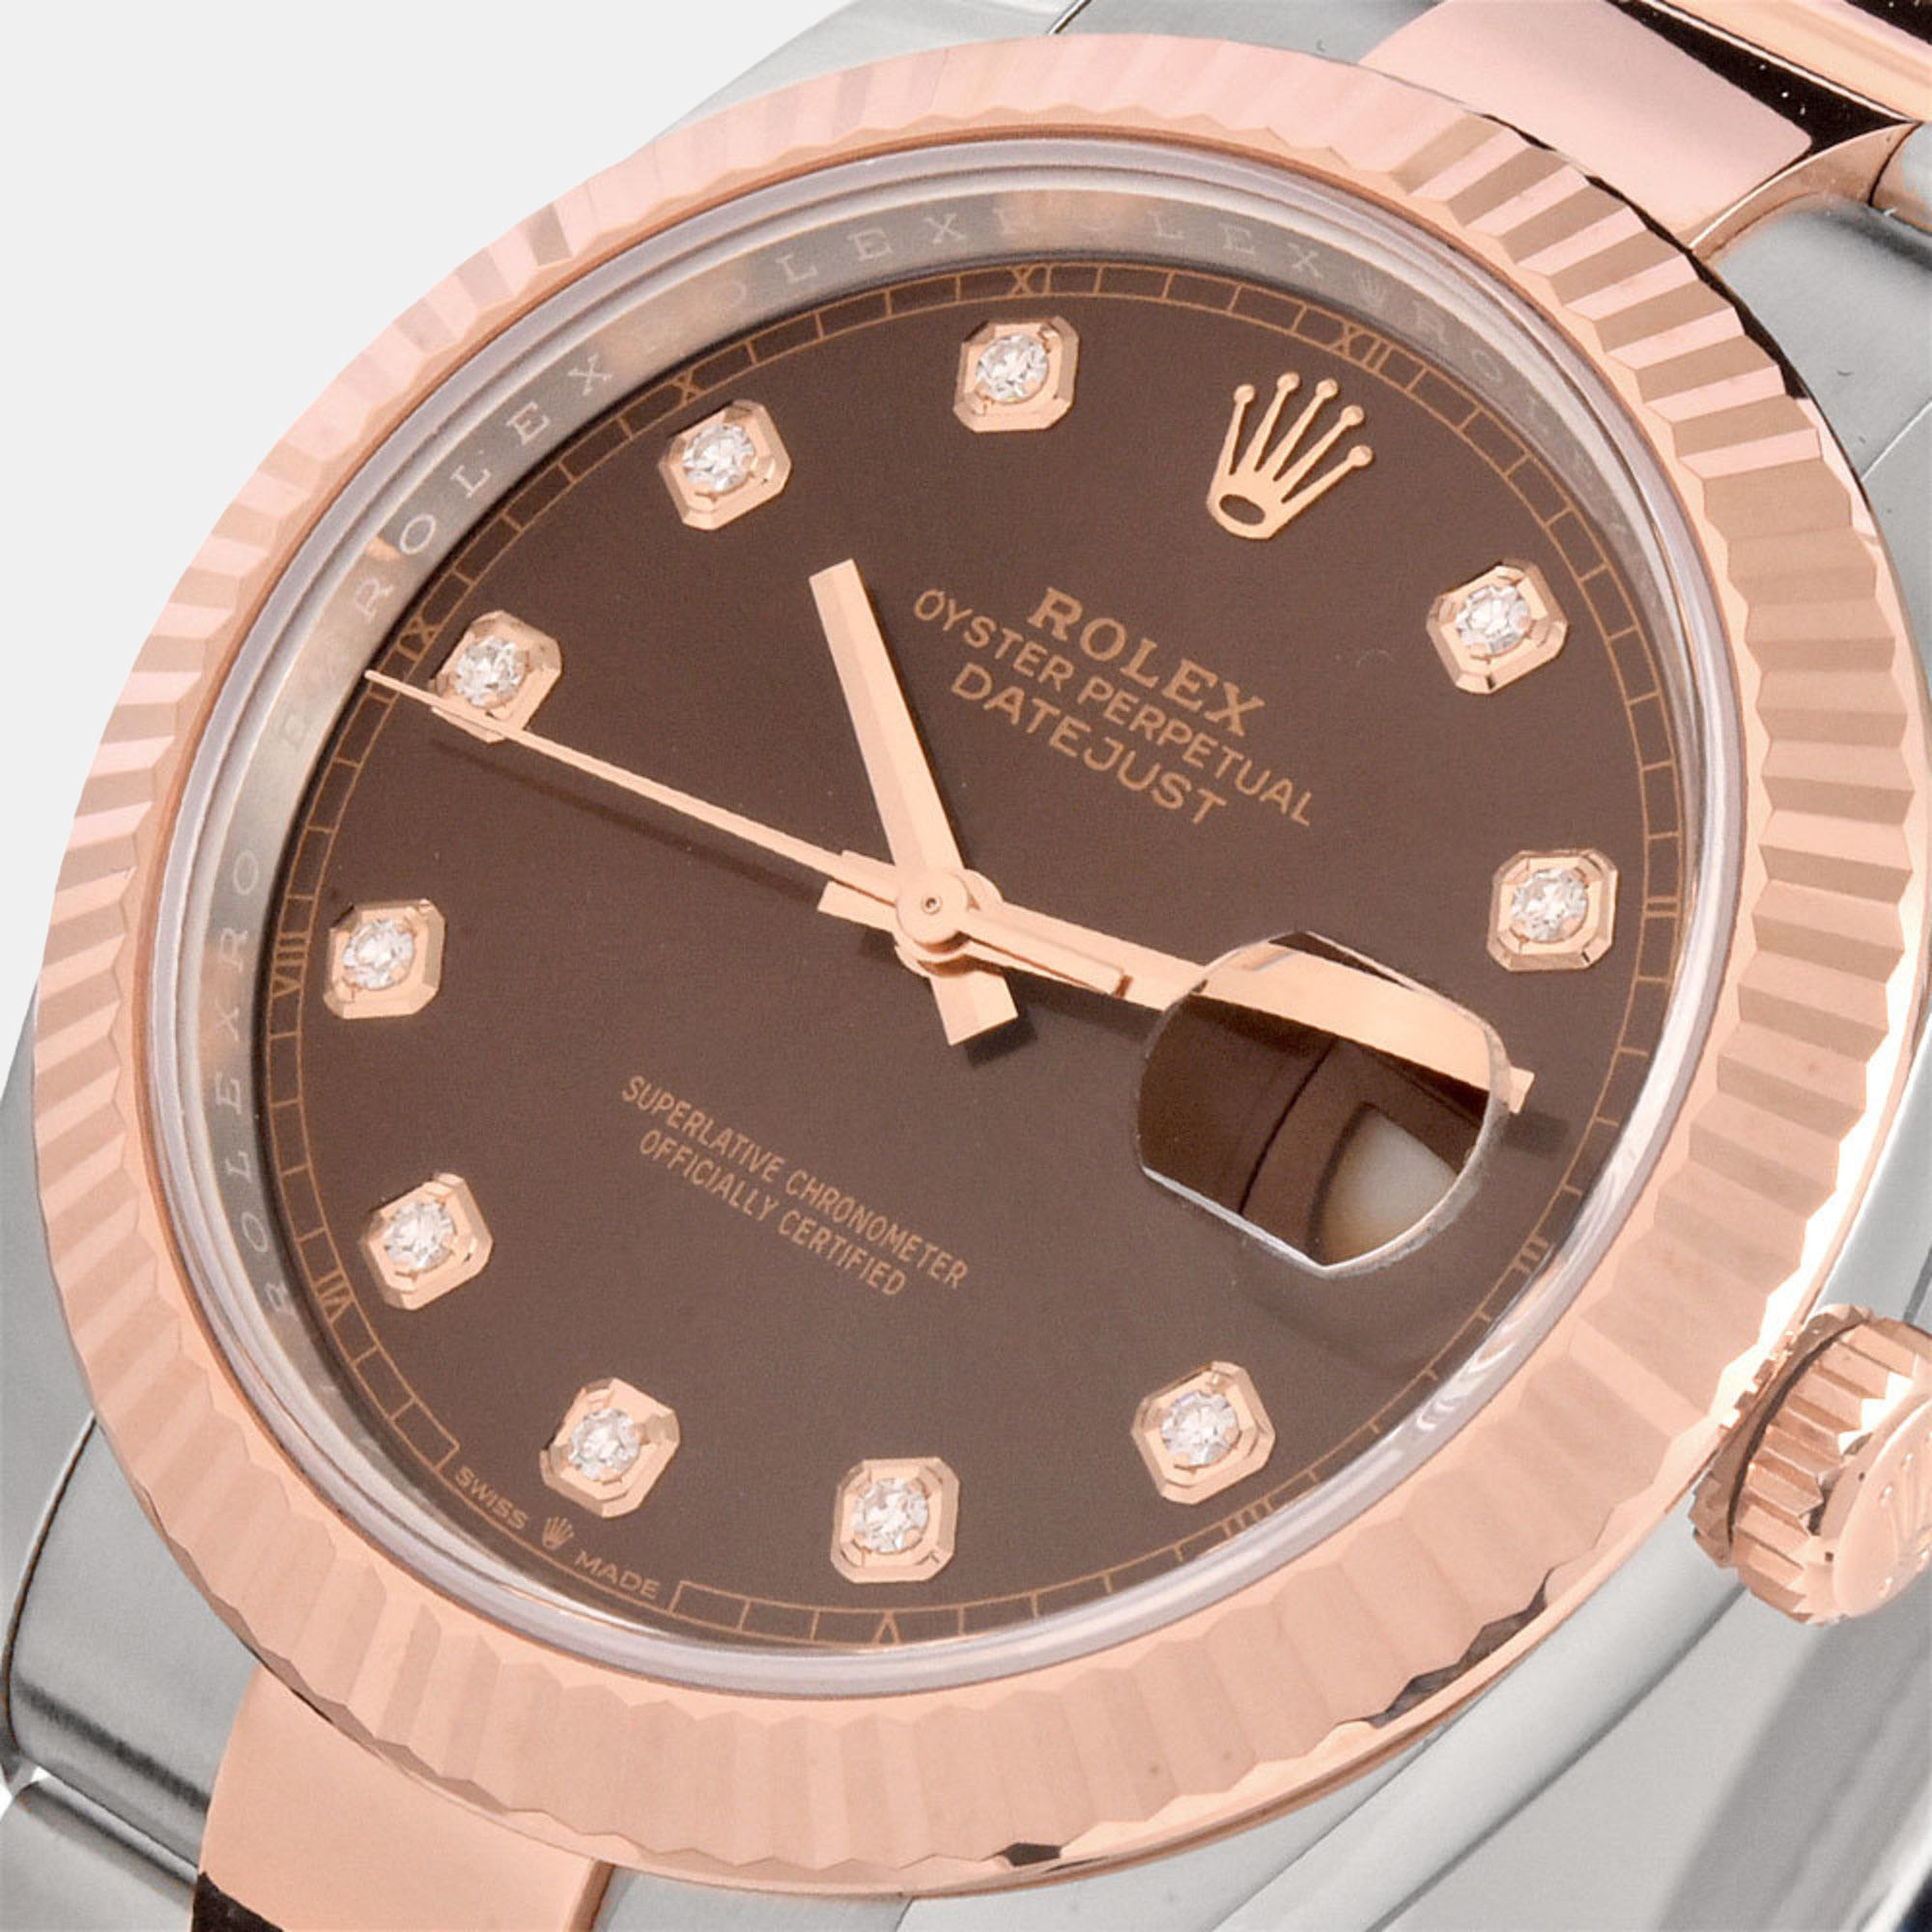 

Rolex Brown Diamond 18k Rose Gold And Stainless Steel Datejust 126331 Automatic Men's Wristwatch 41 mm